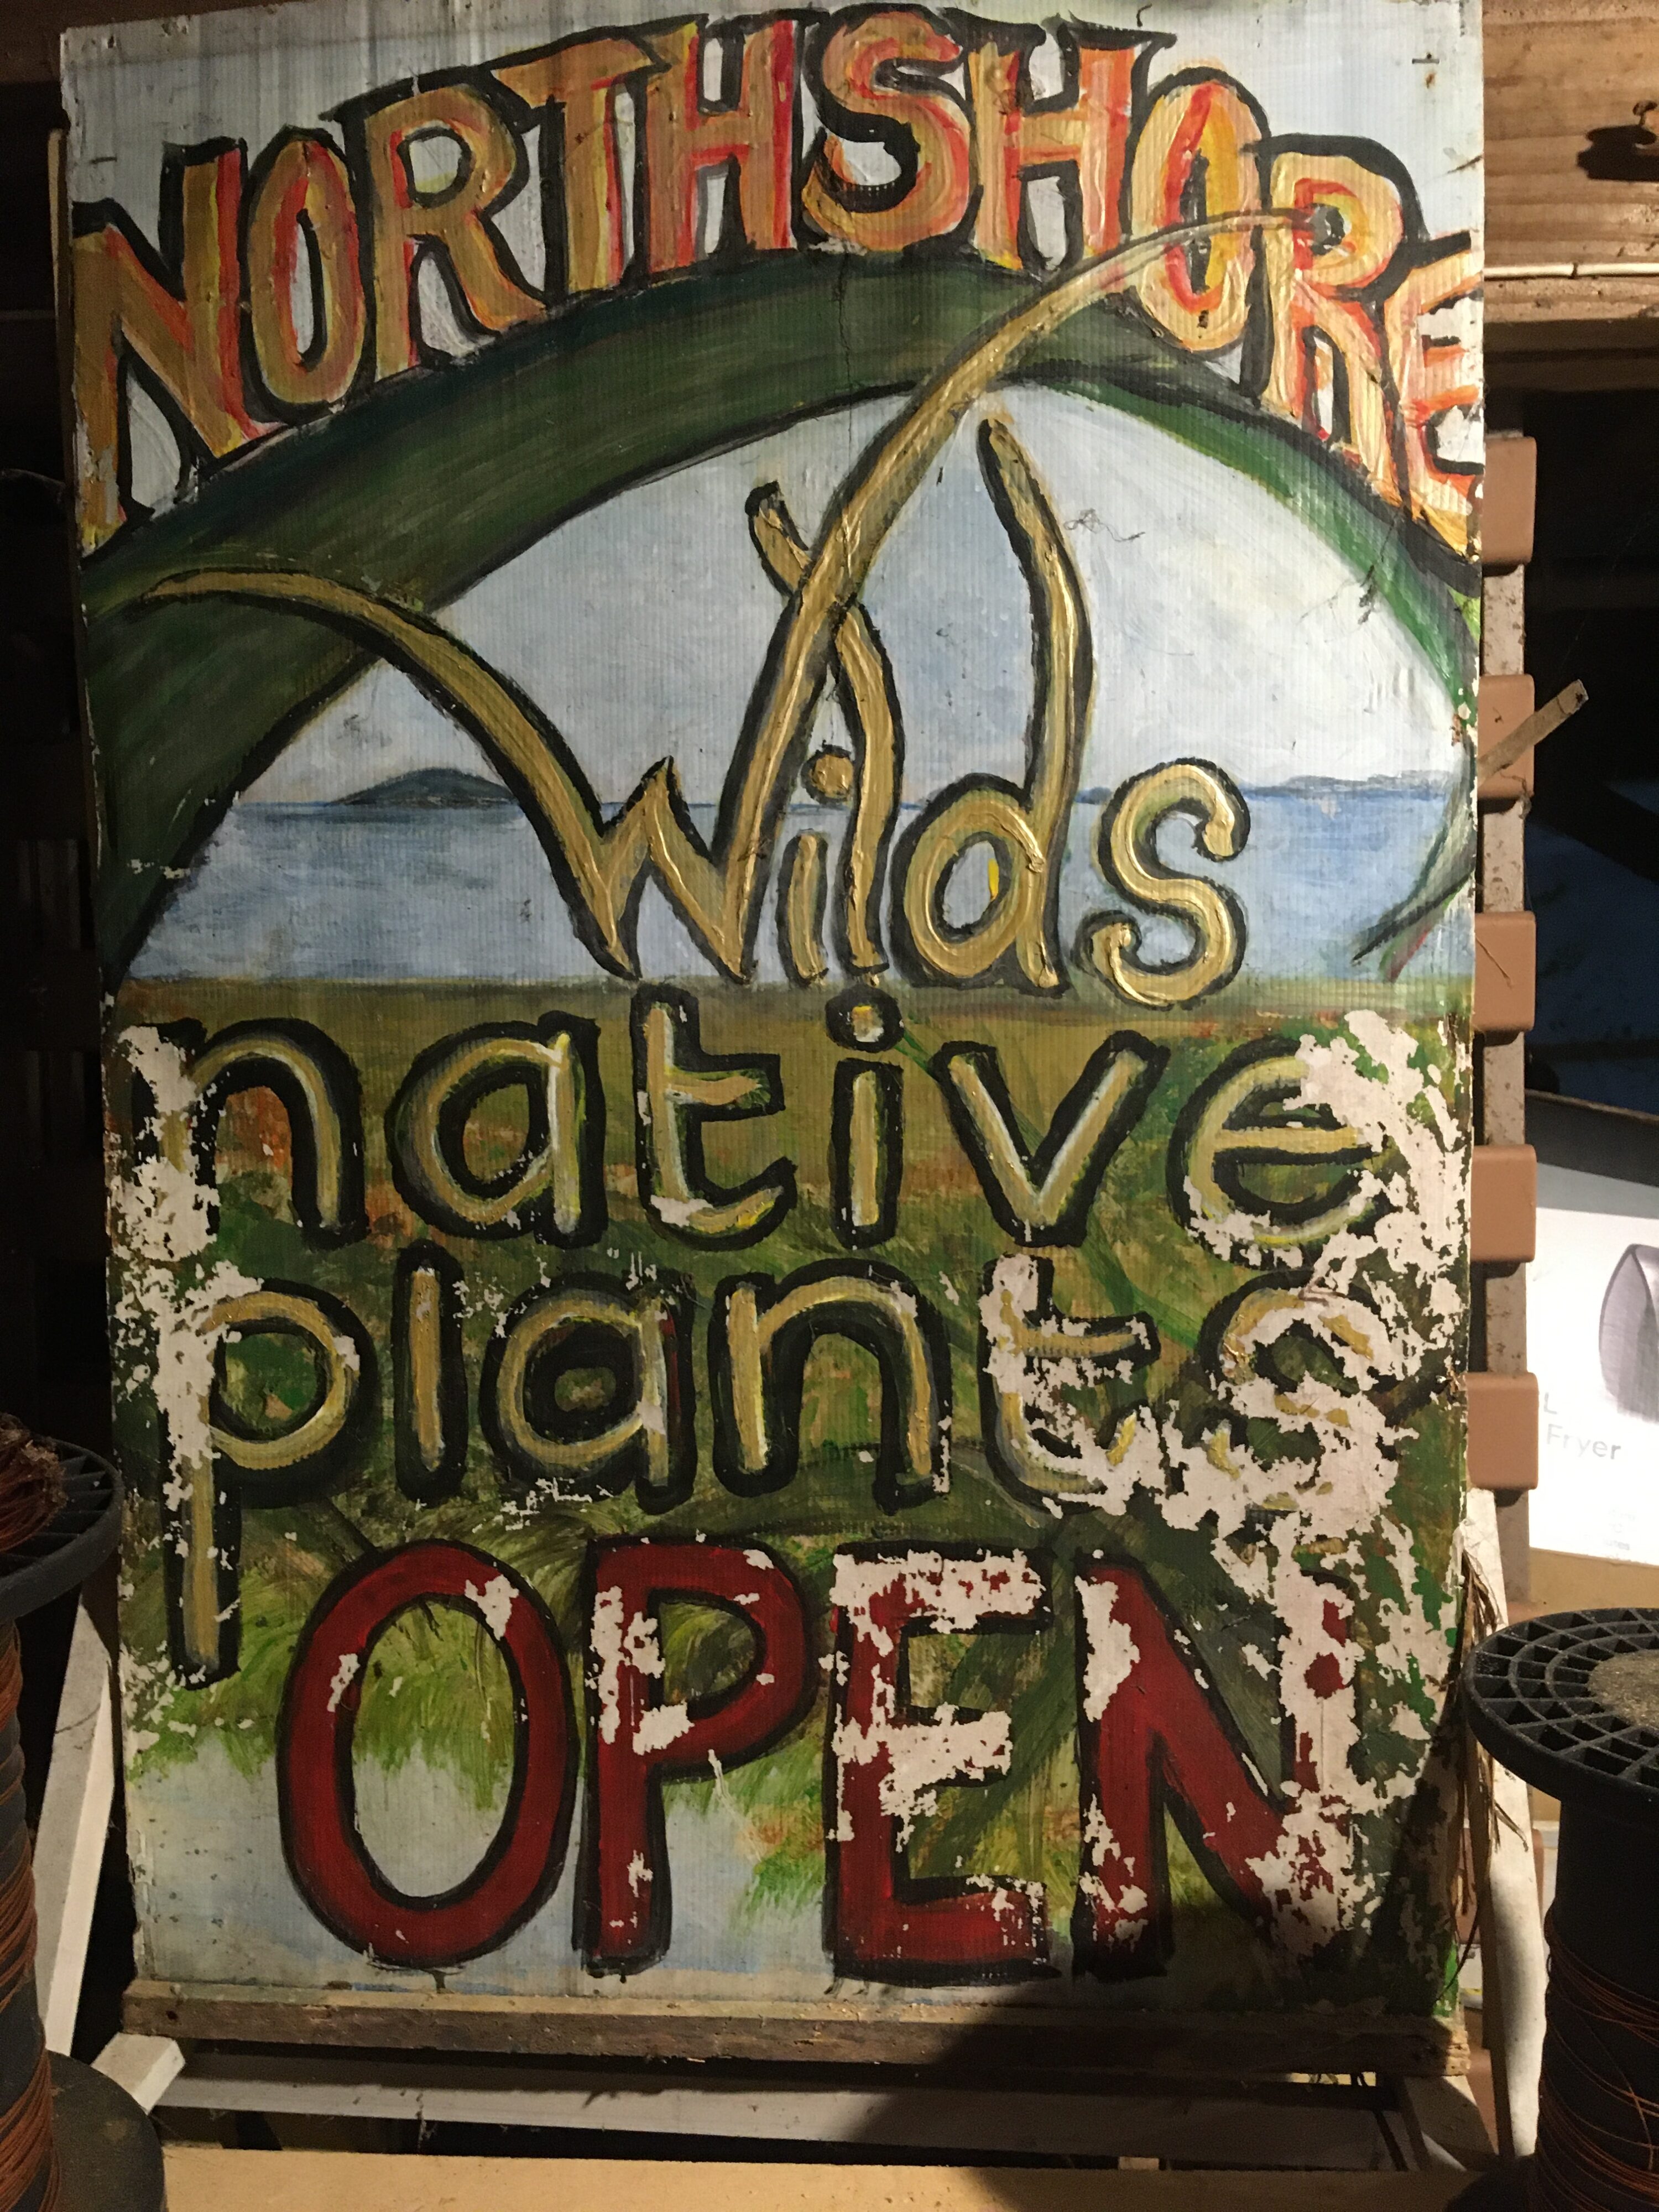 old North Shore Wilds sign